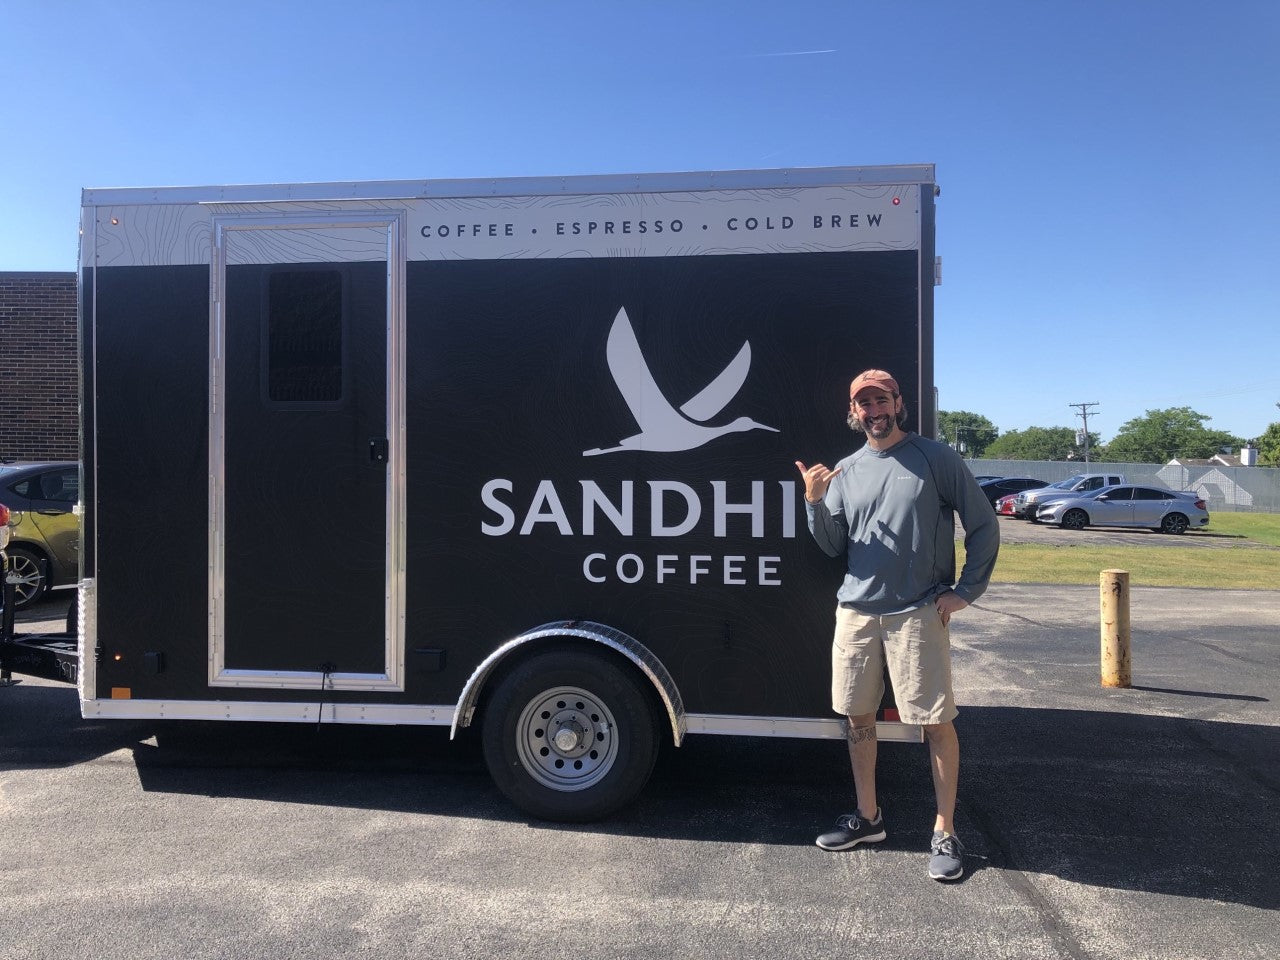 Meet the Sandhill Mobile Cafe: A Q&A with Phil